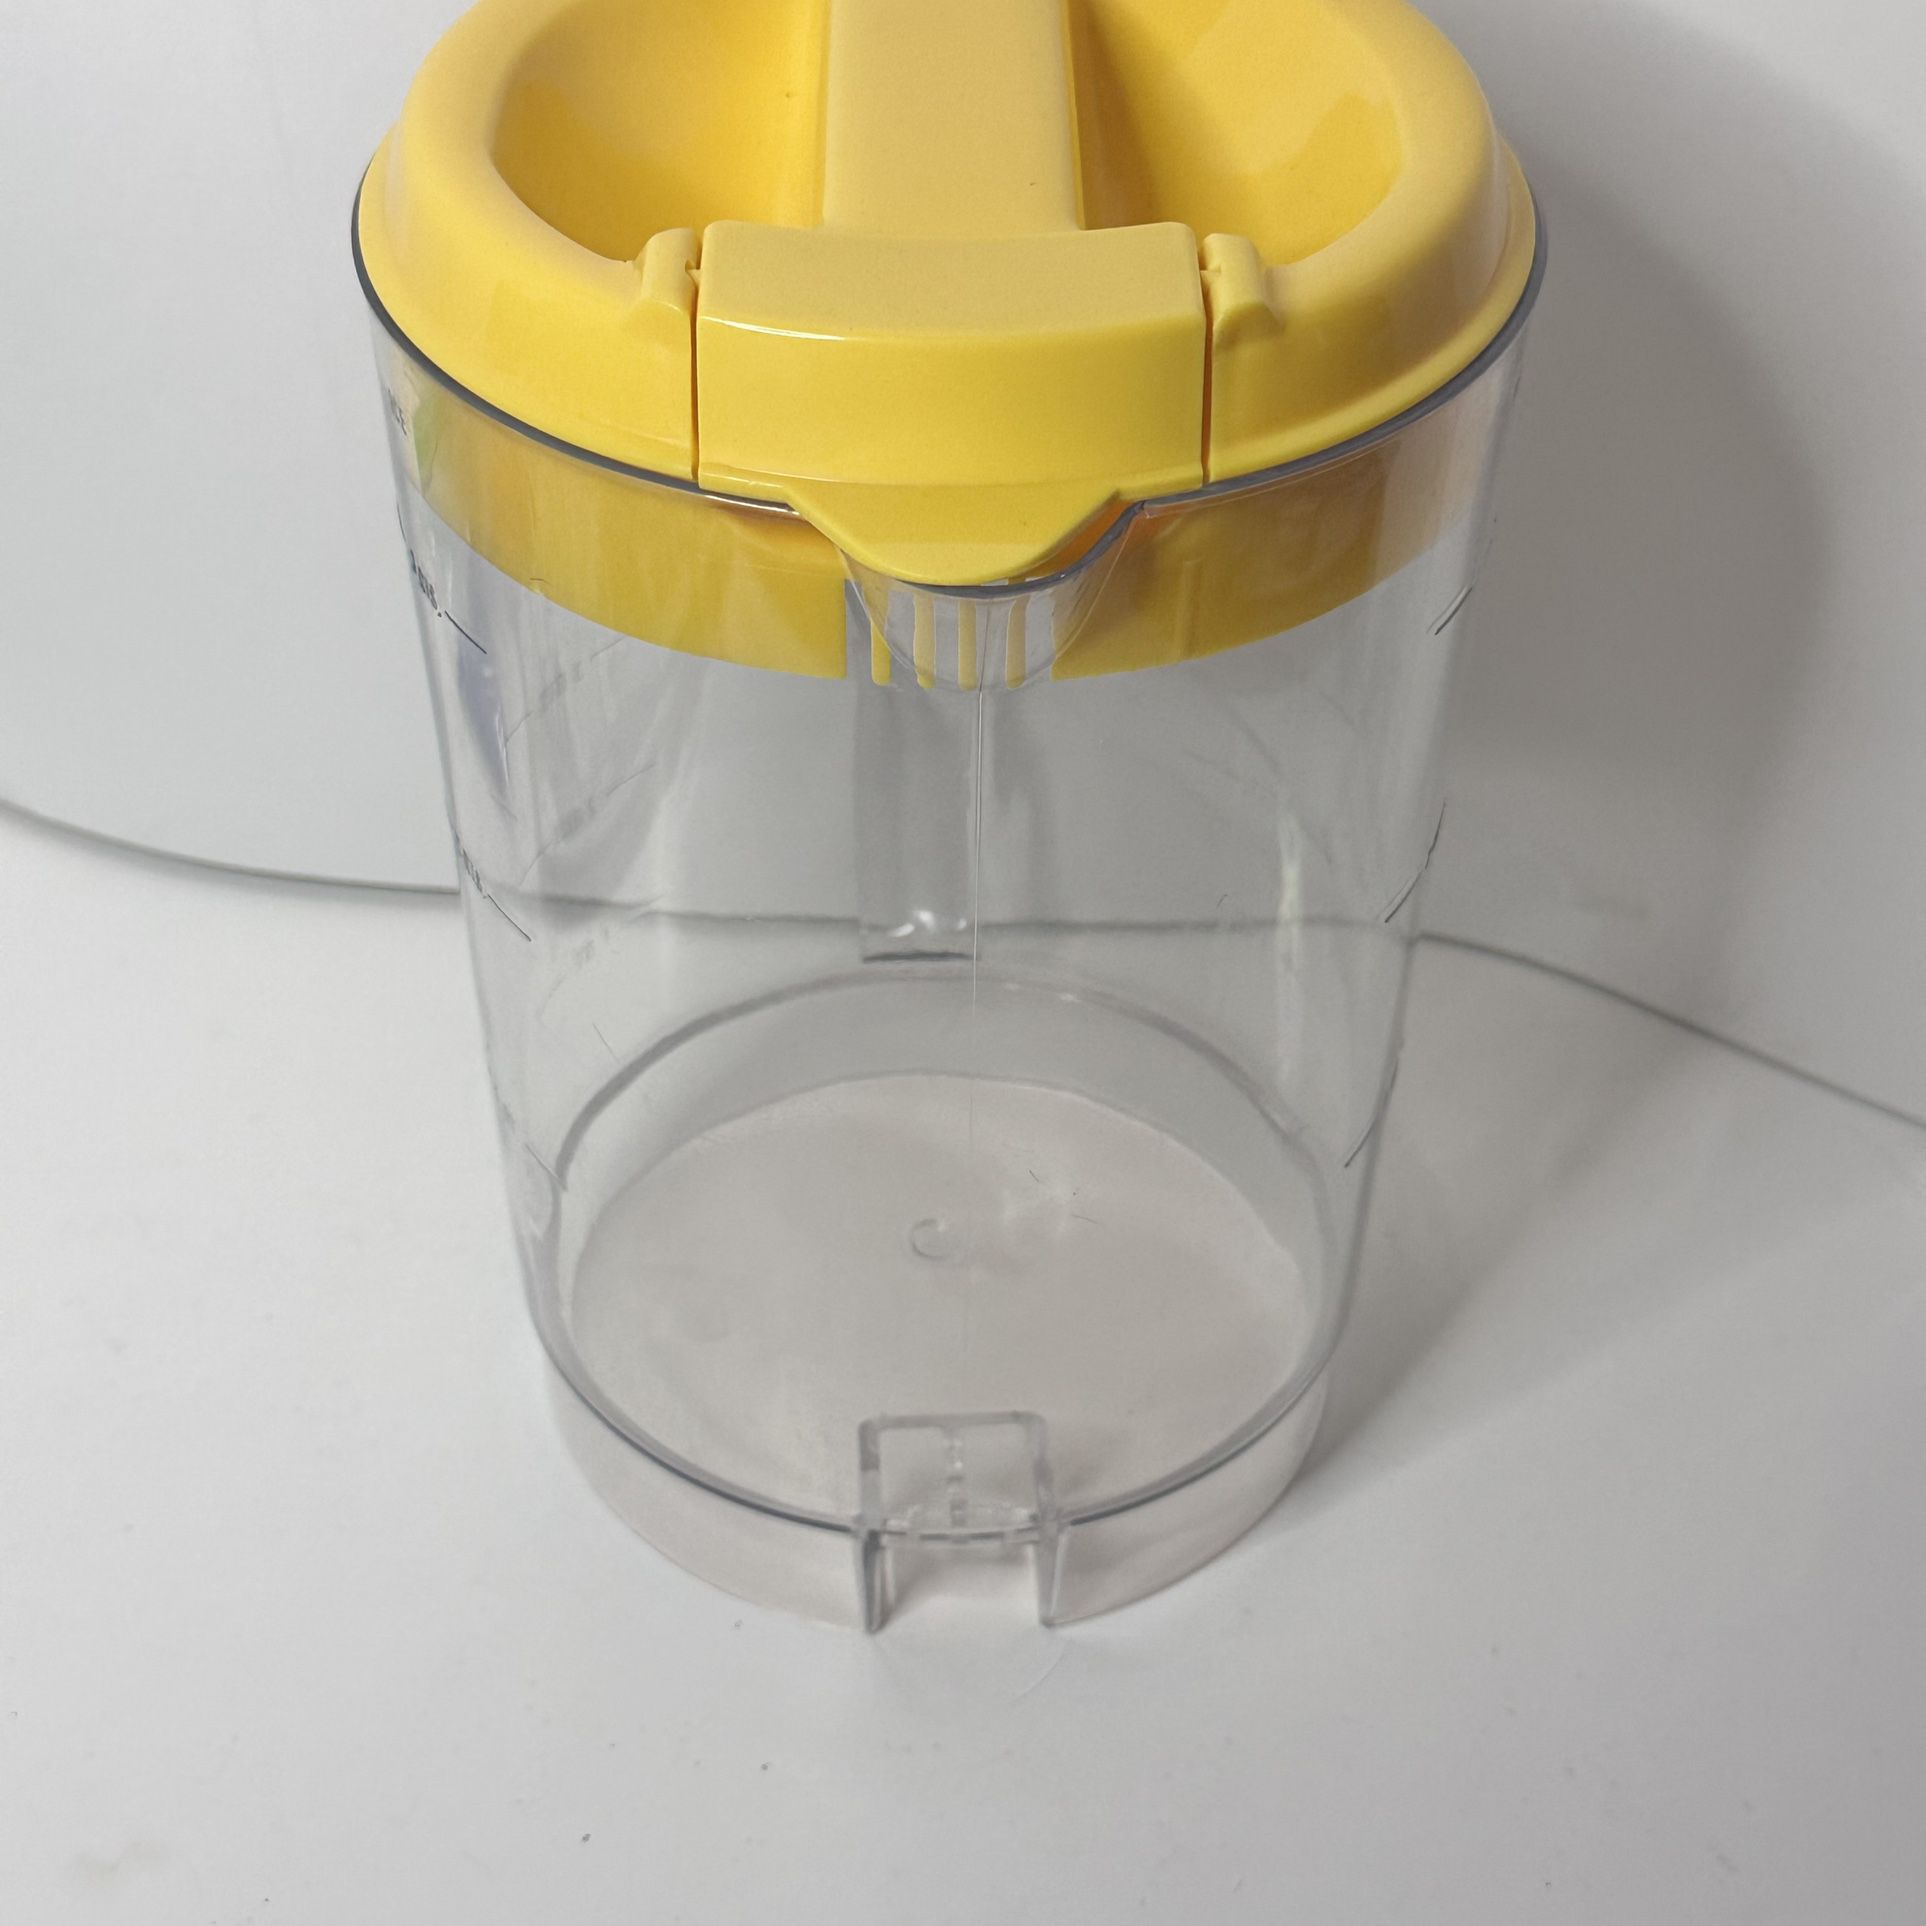 mr coffee iced tea maker cracked pitcher solution｜TikTok Search